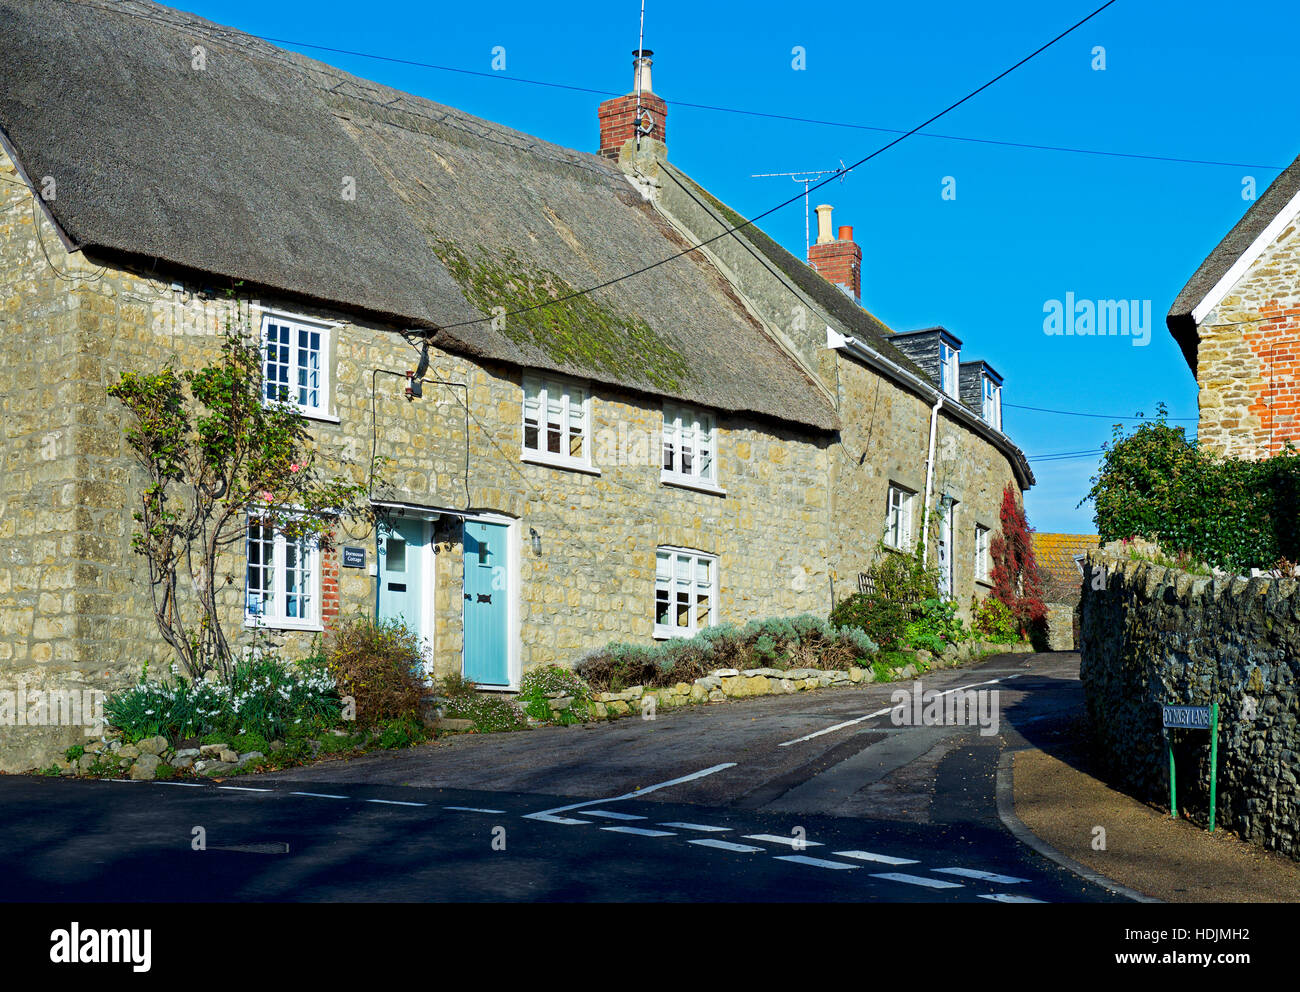 Thatched Cottages In Burton Bradstock Stock Photos Thatched